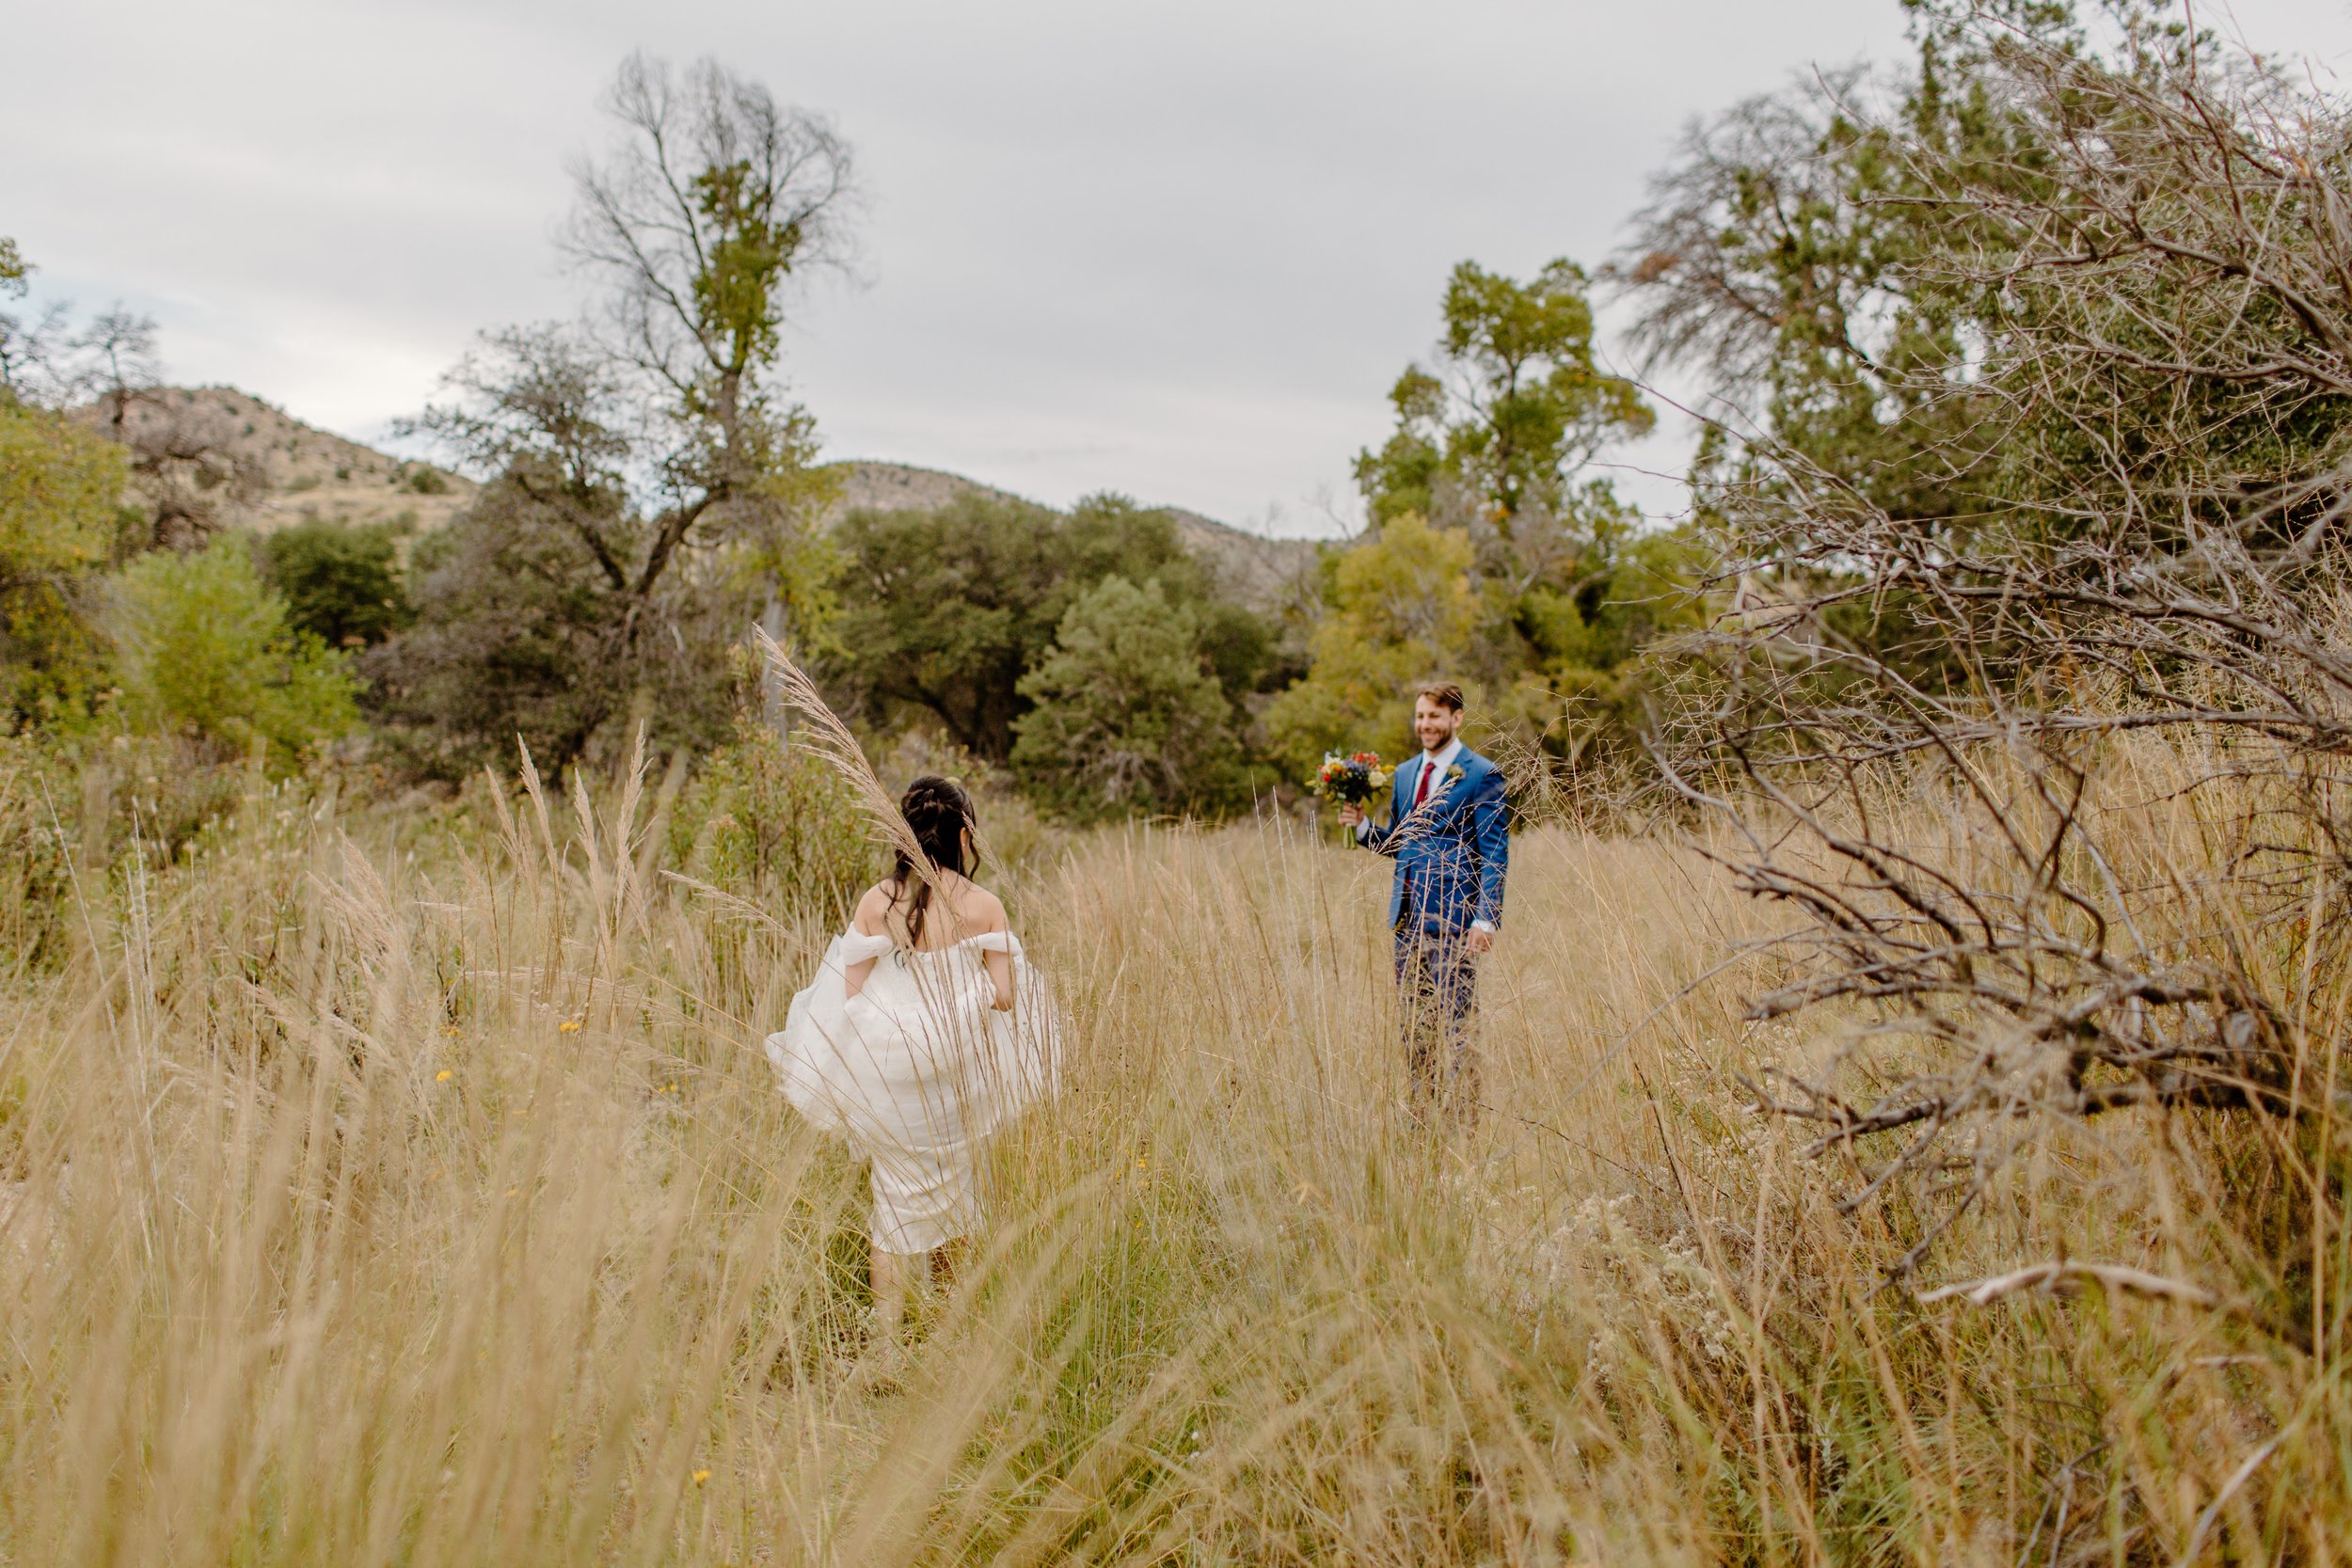  man and woman walking through tall grass in wedding apparel by Lucy bouman photo  